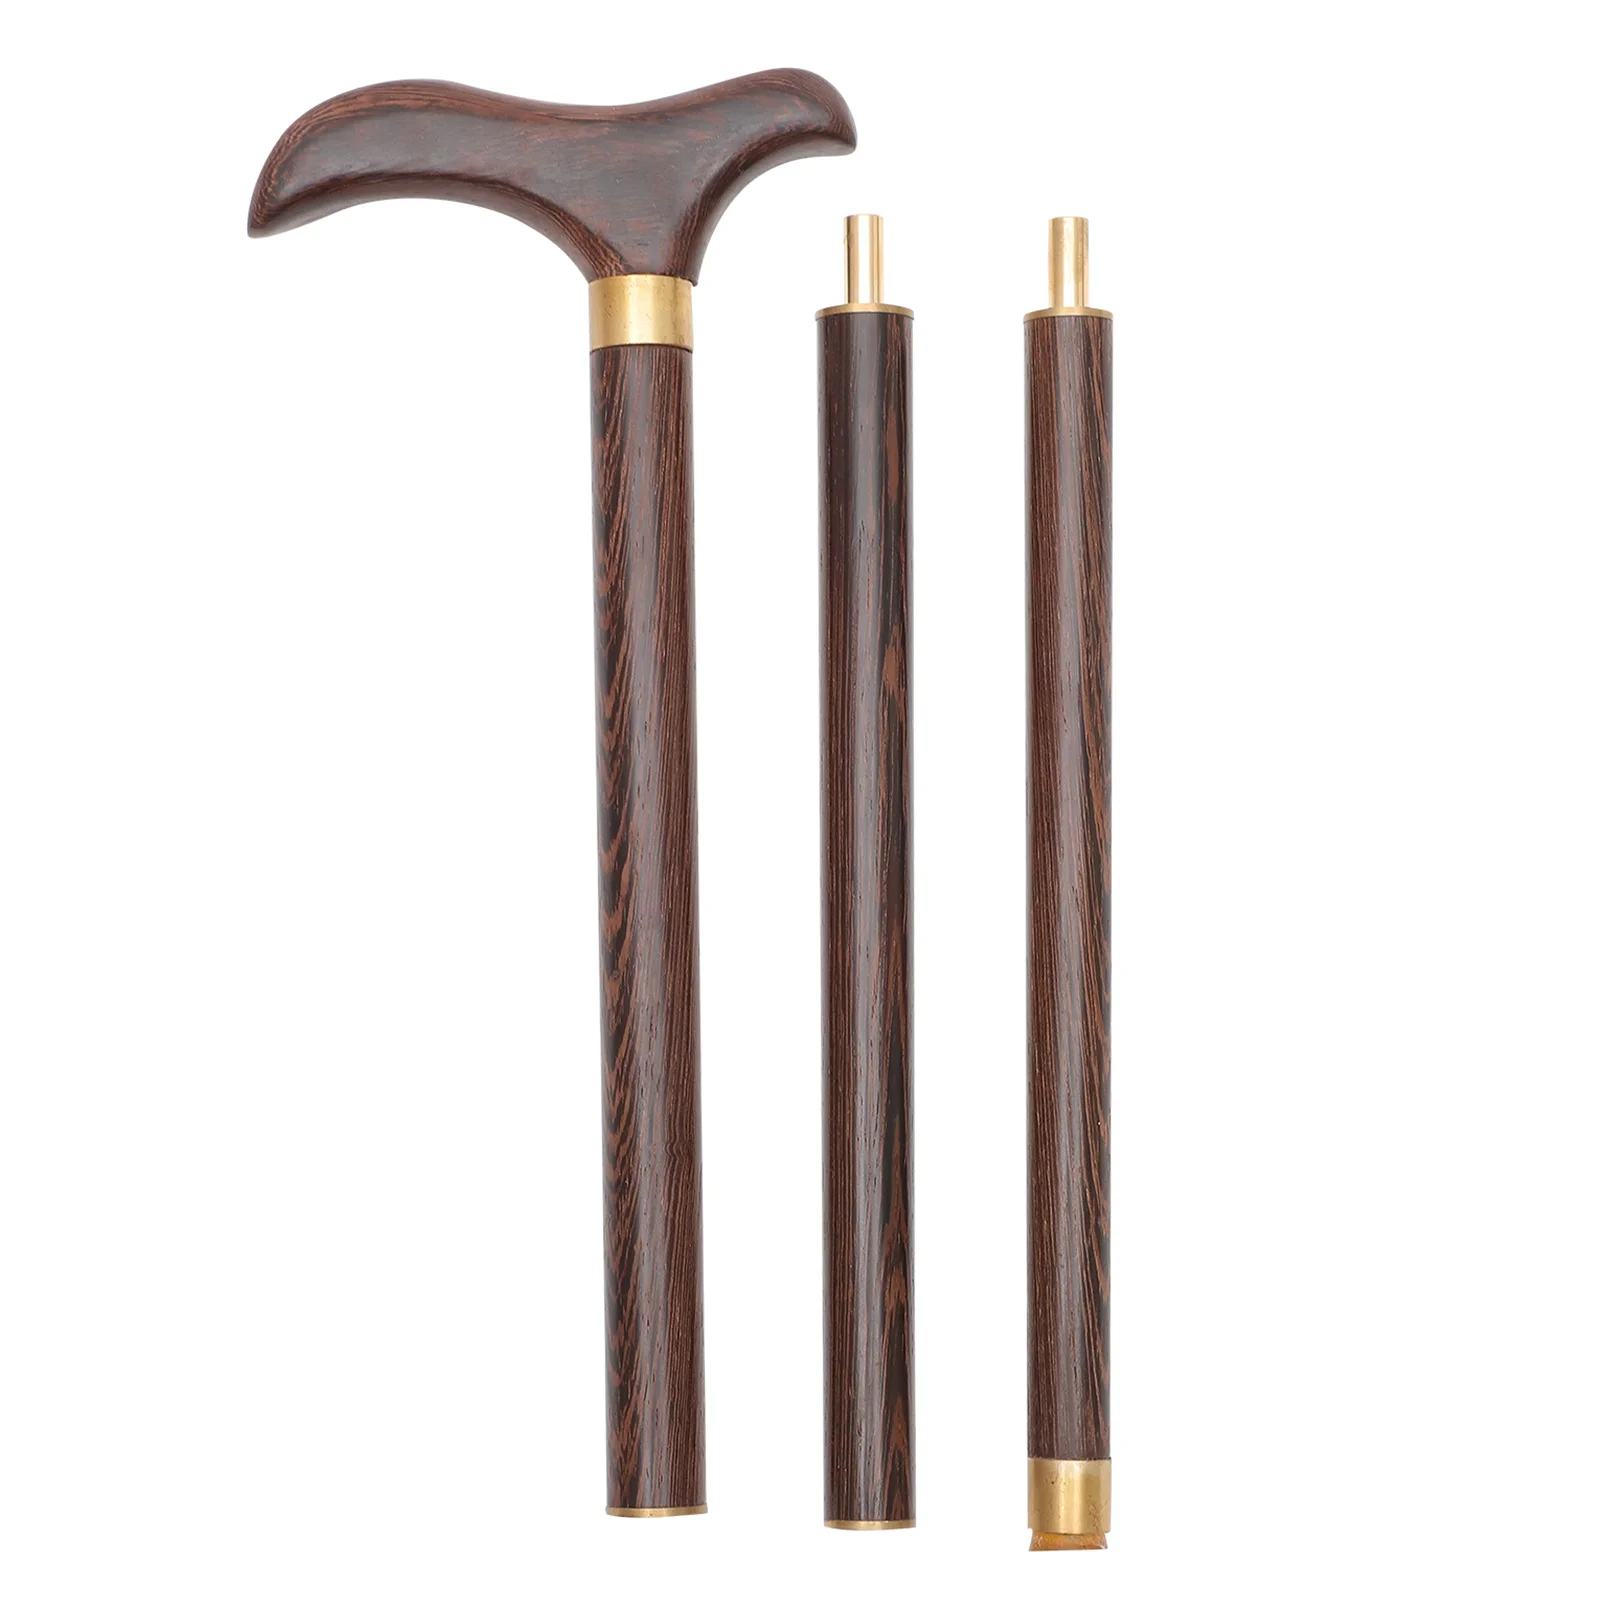 

Pole Walking Trekking Cane Hiking Stick Outdoor Wooden Sticks Collapsible Poles Wood Camping Climbing Mountaineering Detachable